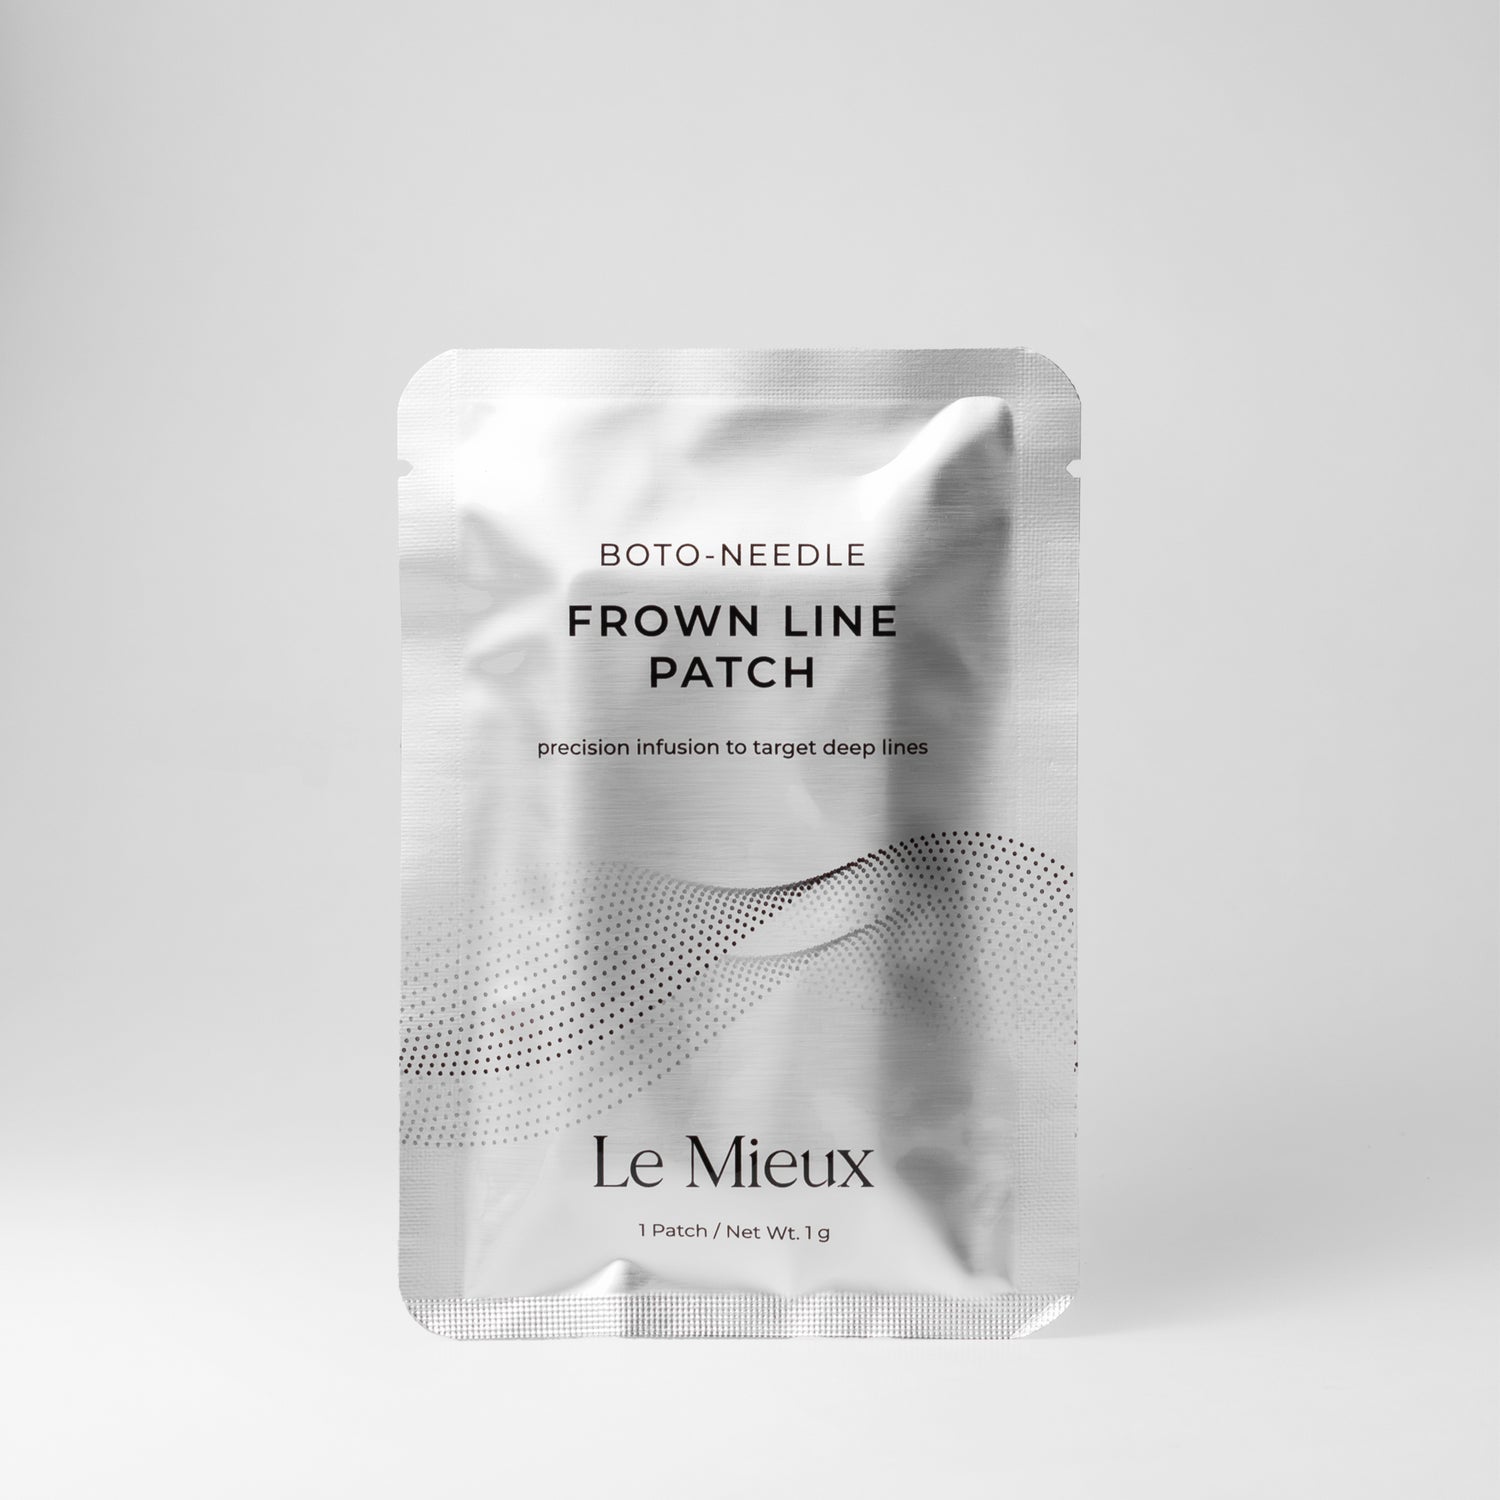  Boto-Needle Frown Line Patch from Le Mieux Skincare - 1